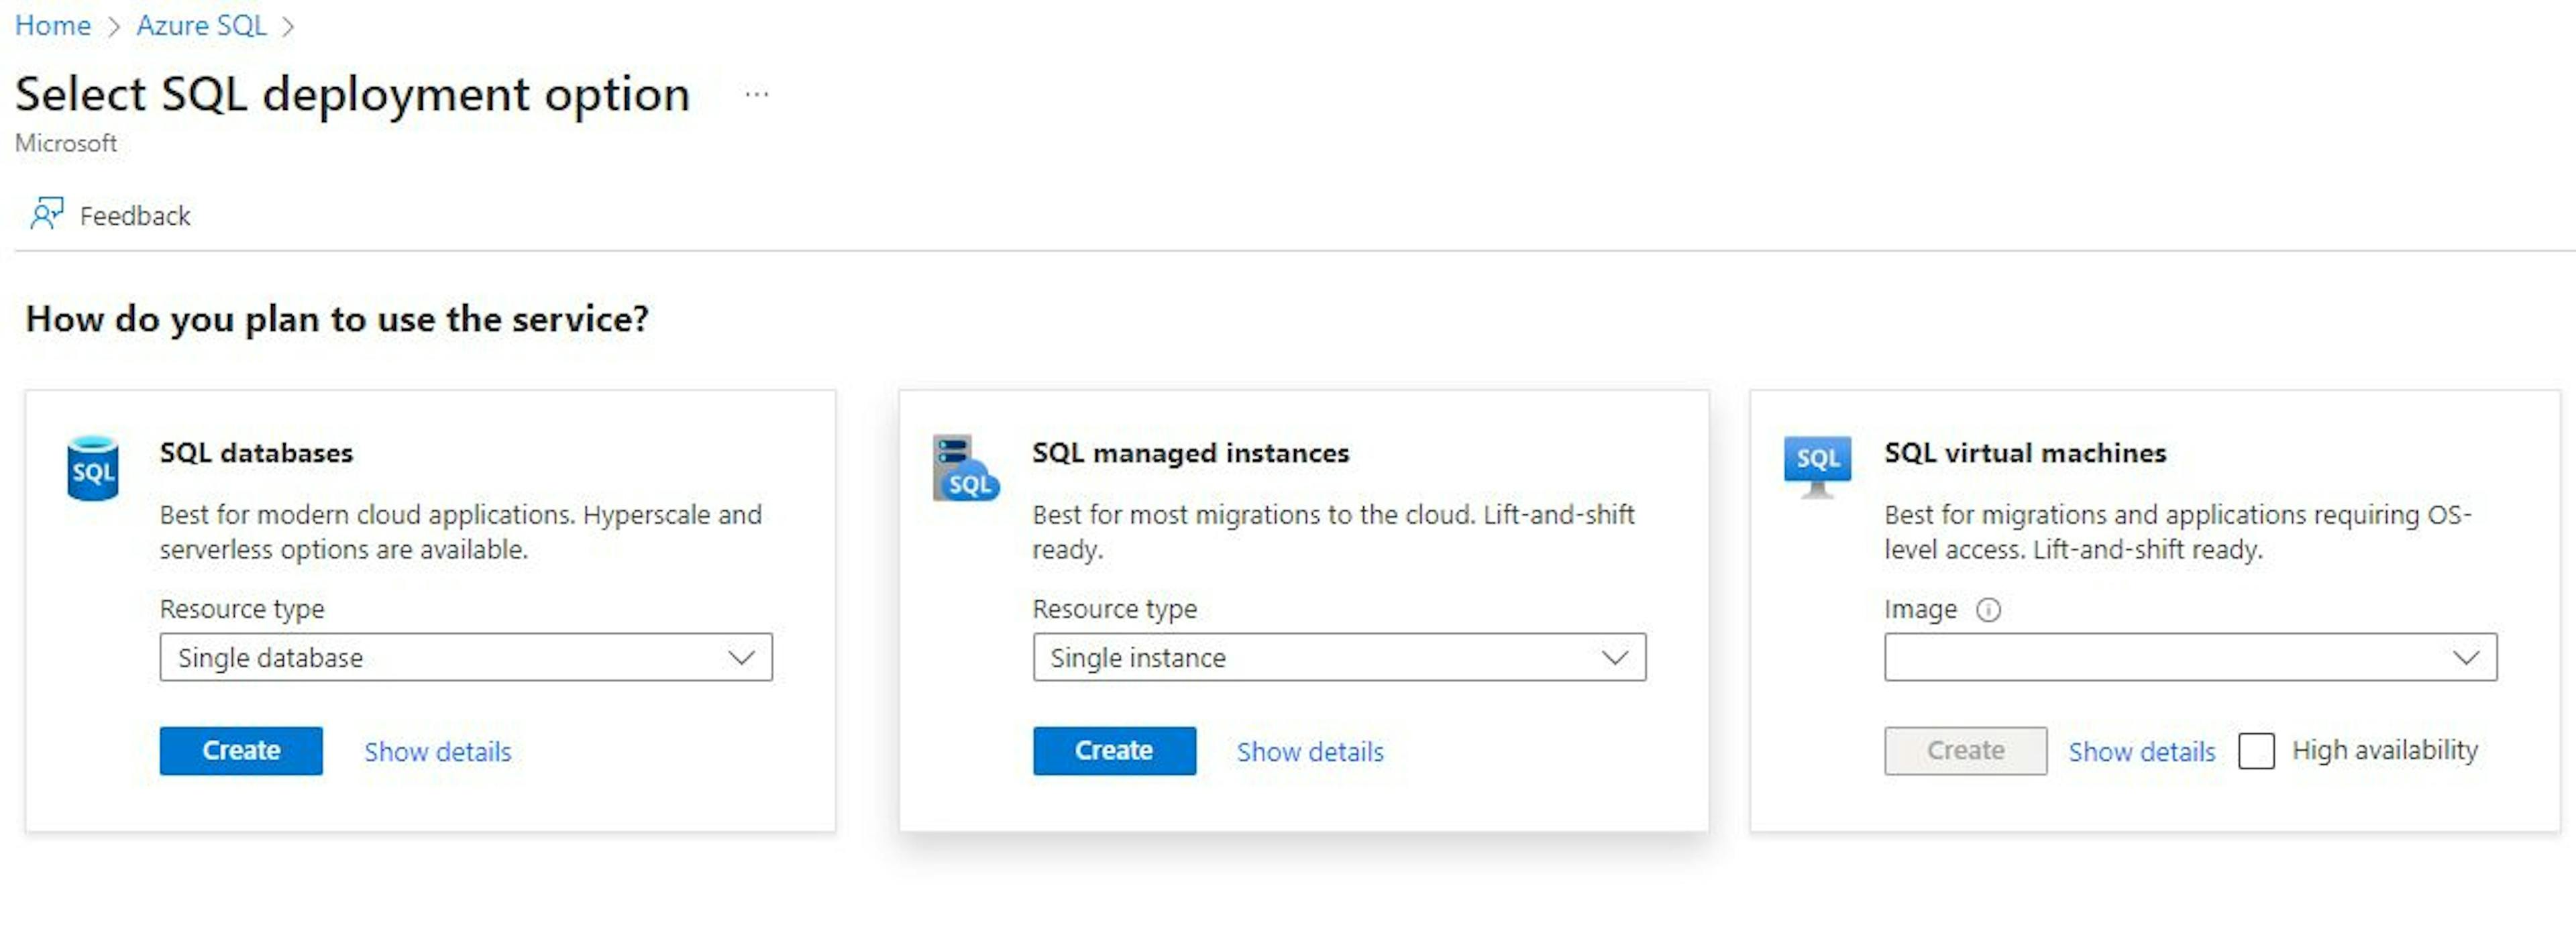 The first step to create an SQL server